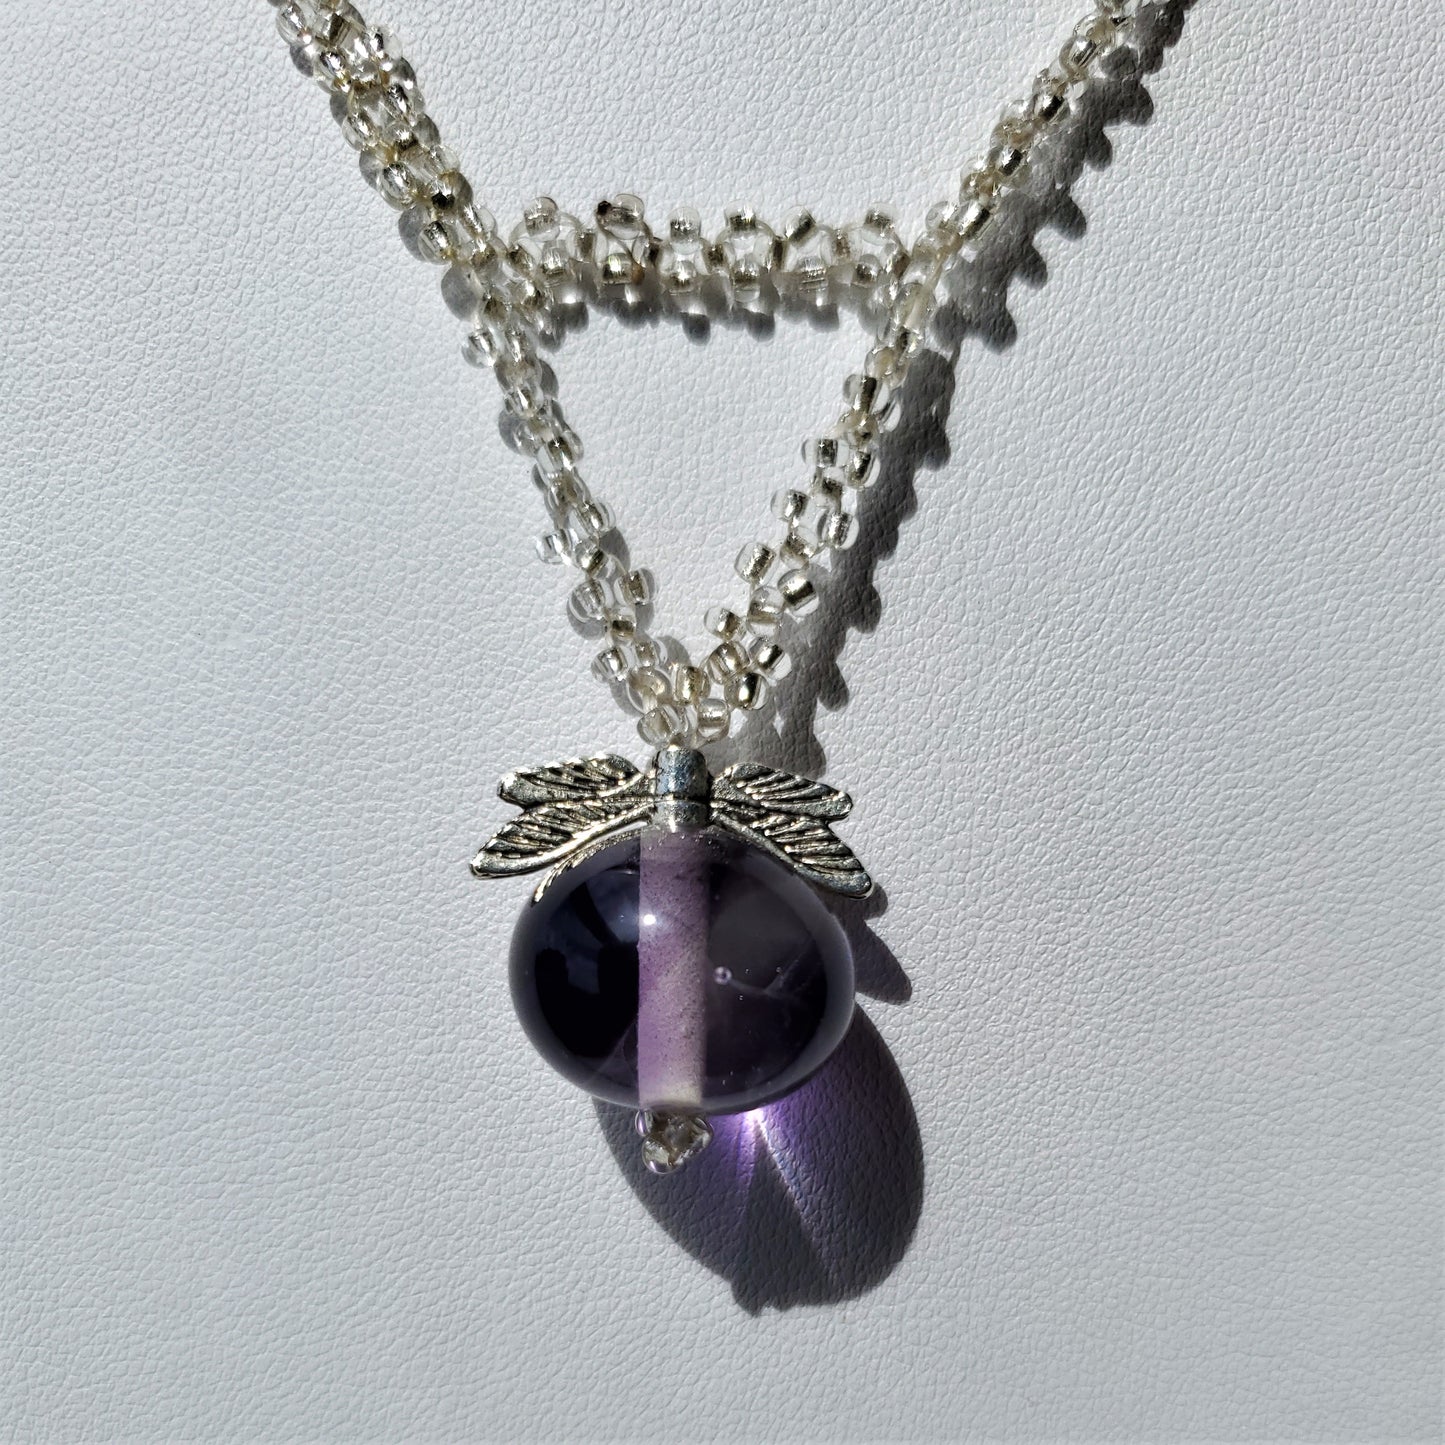 Hand crafted Purple Orb and Dragonfly Recycled Glass Necklace